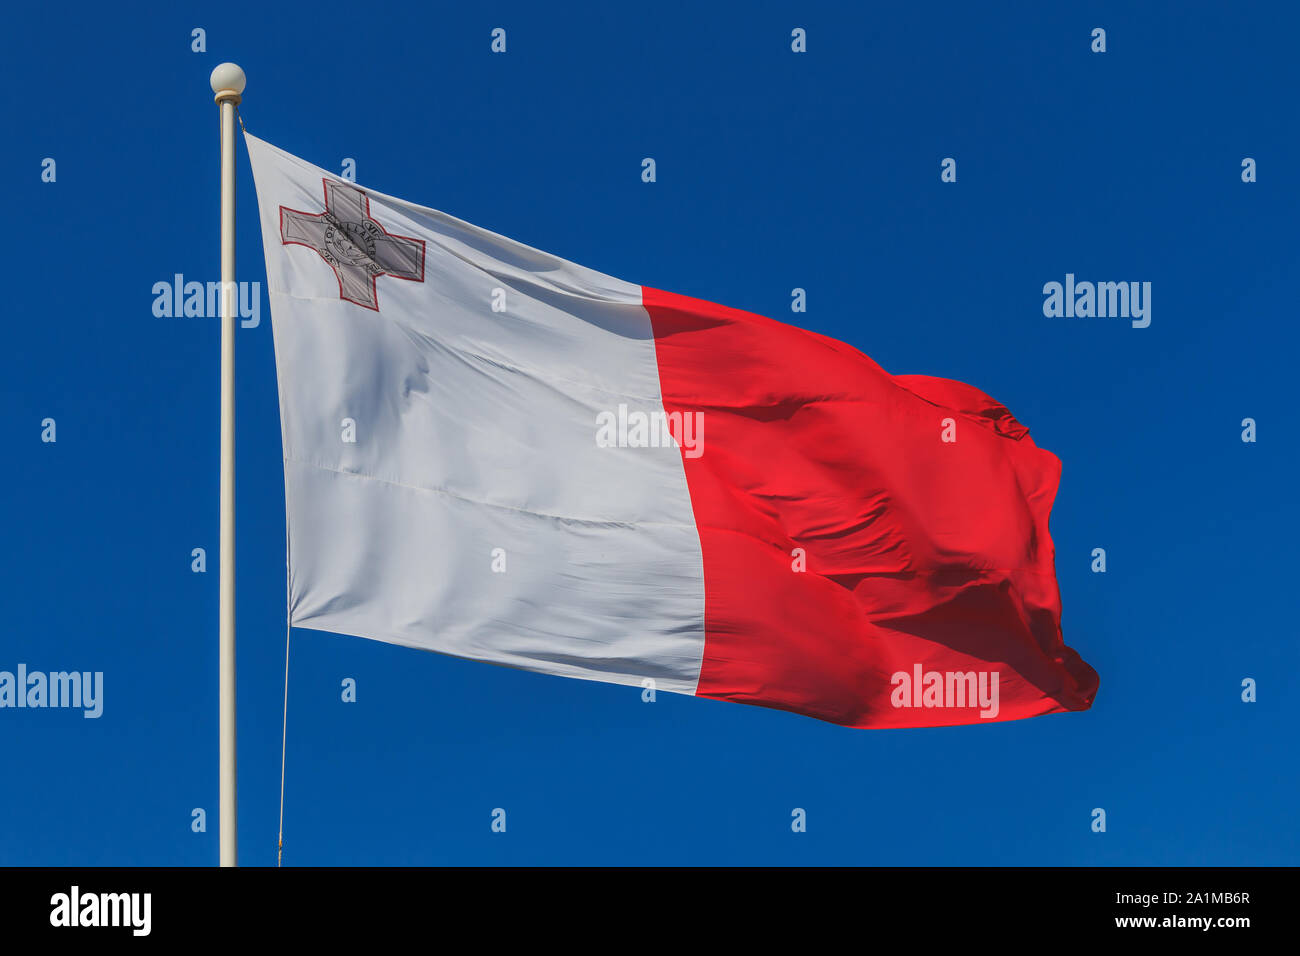 Malta national flag is waving in deep blue sky background Stock Photo